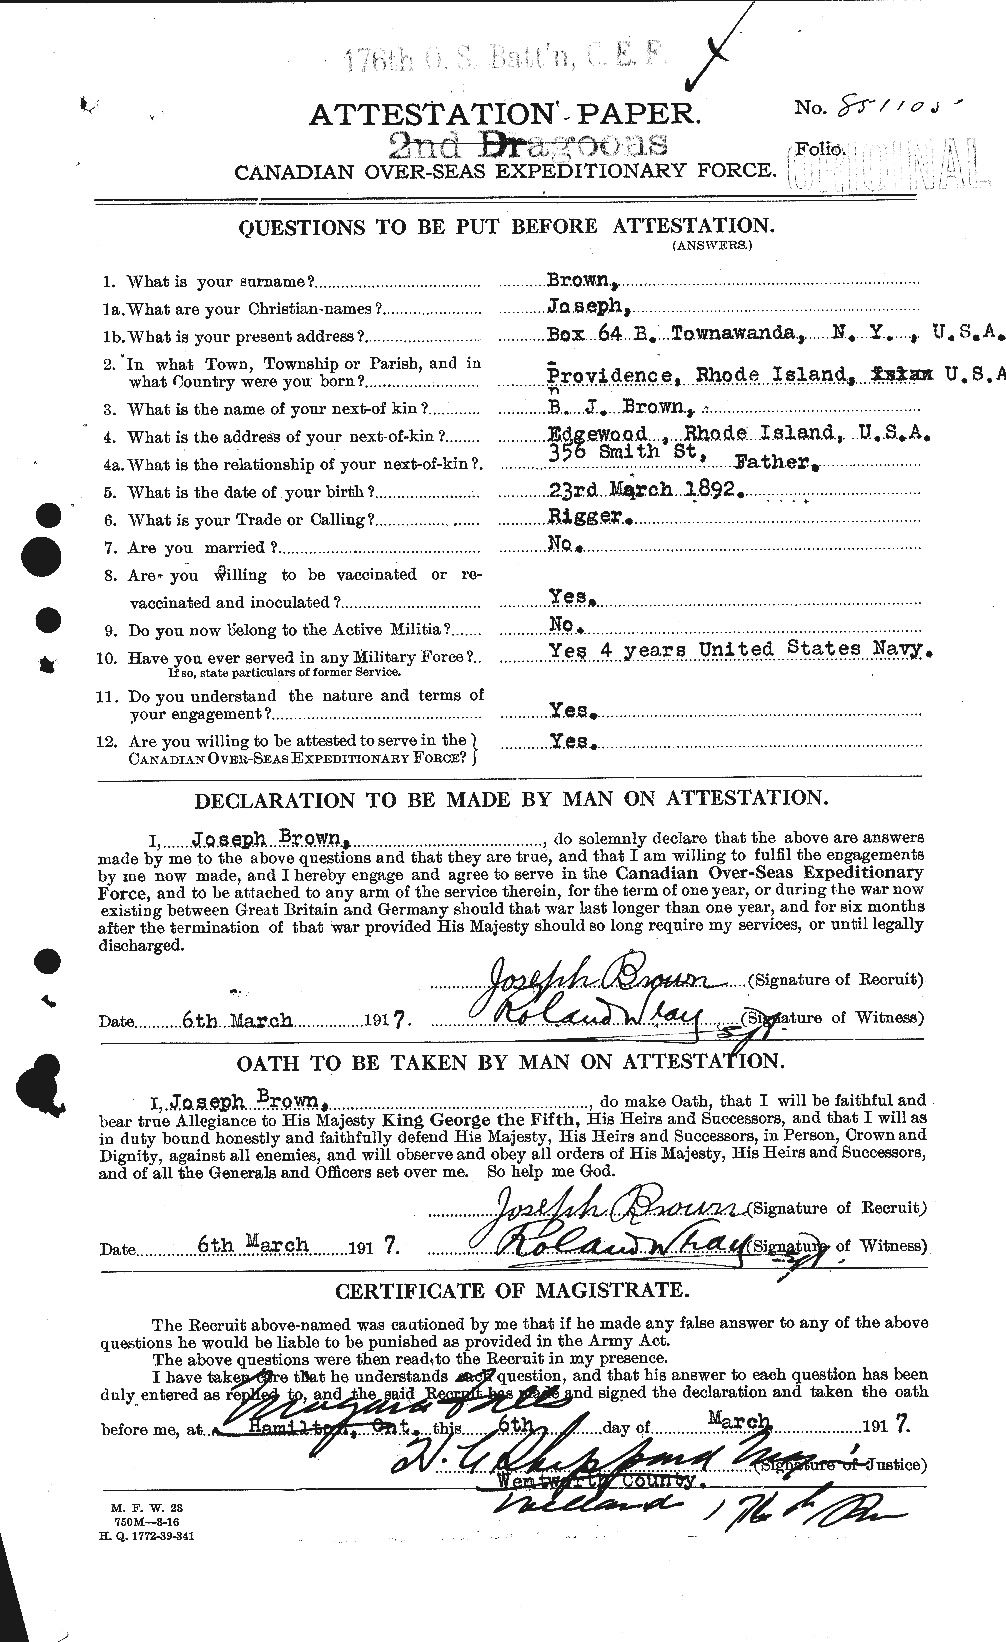 Personnel Records of the First World War - CEF 265928a